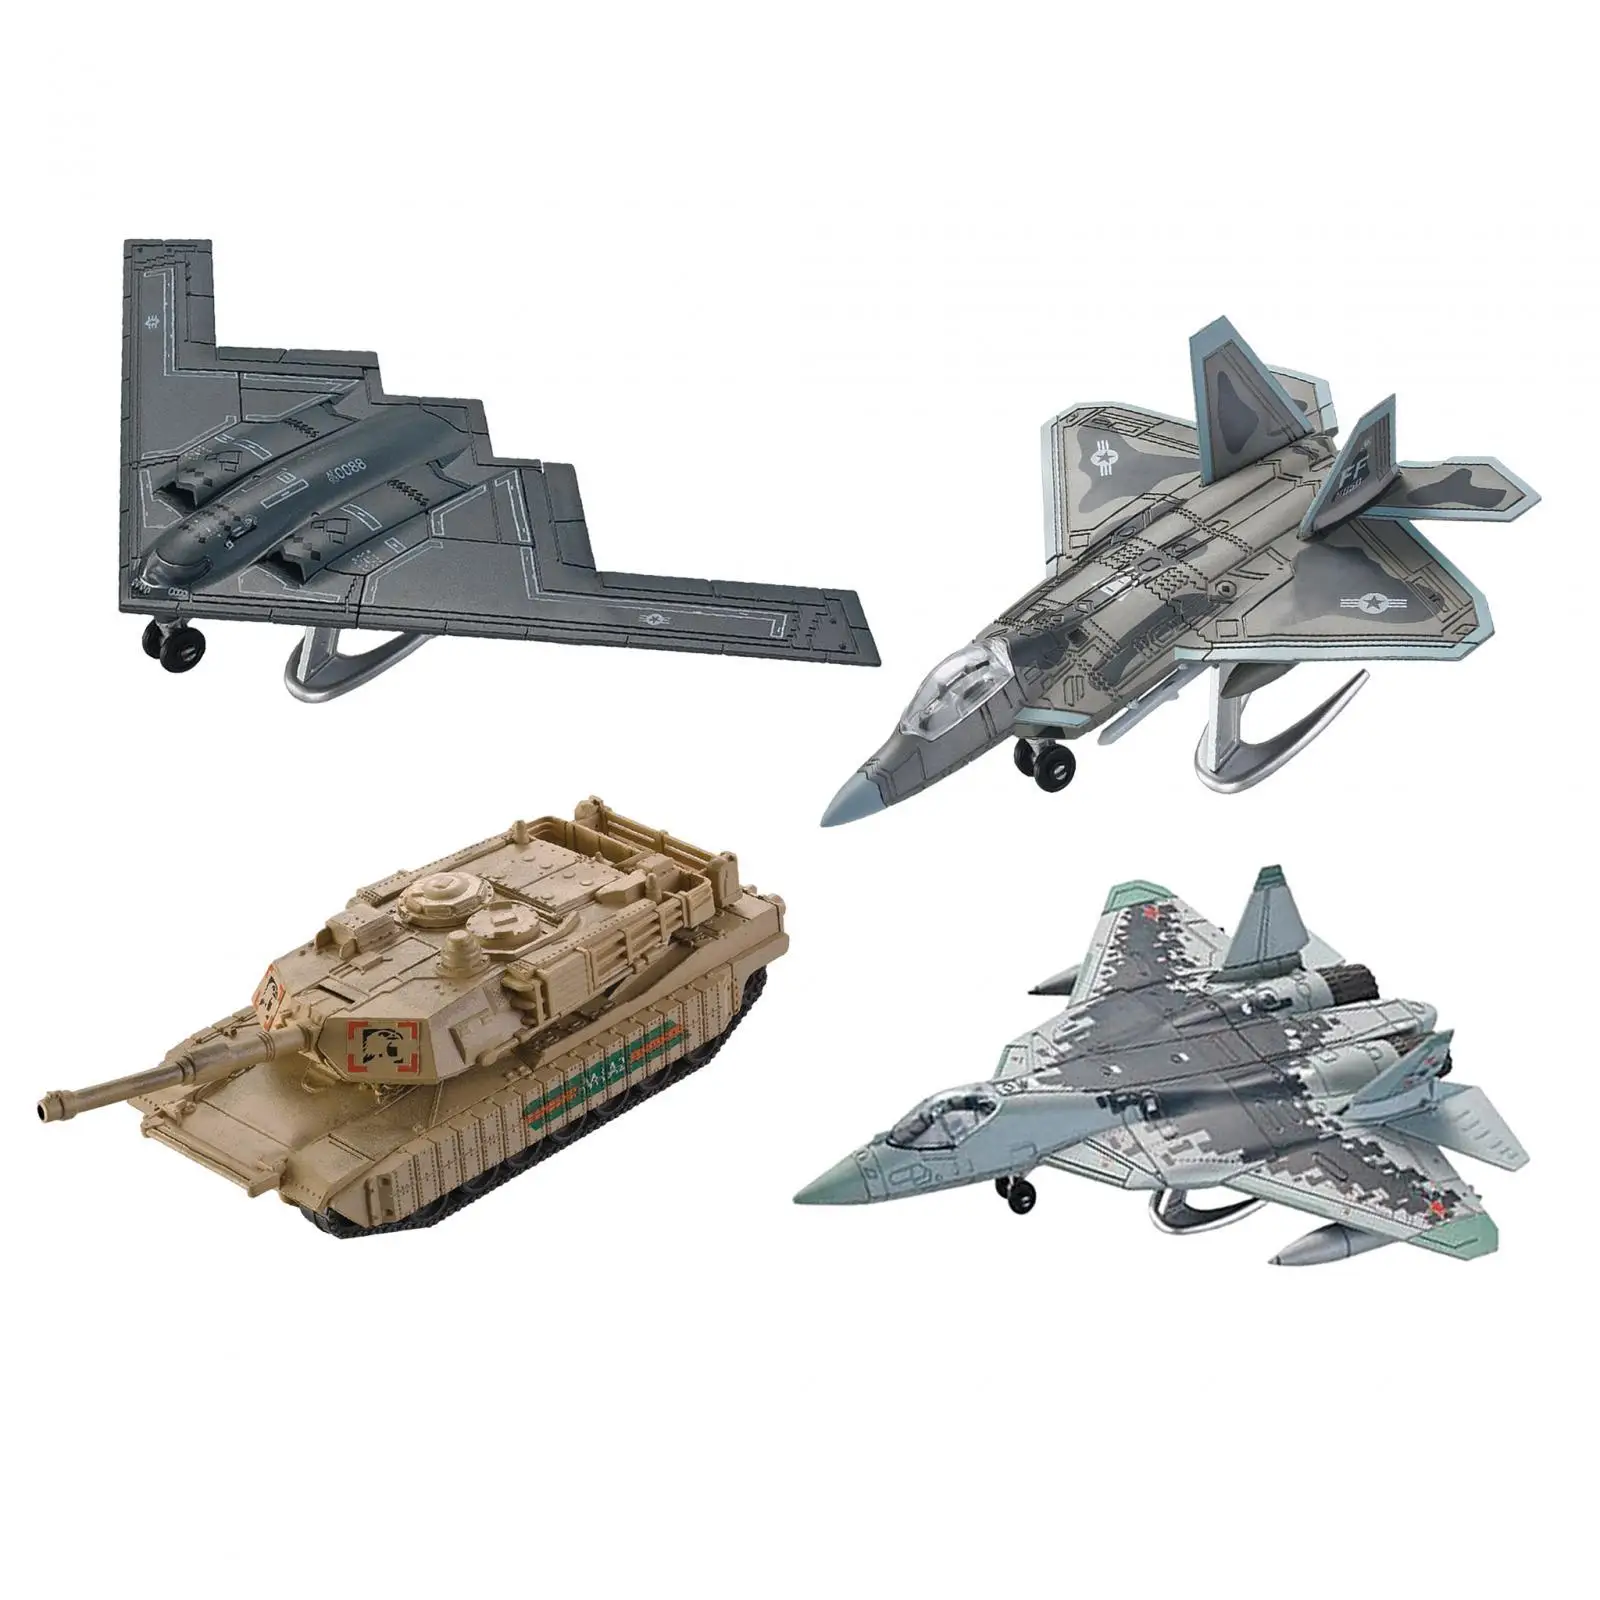 1/72 Fighter Model Plane Model DIY Assemble Collectible Miniature Airplane Building Kits 3D Puzzle for Kids Girls Gifts